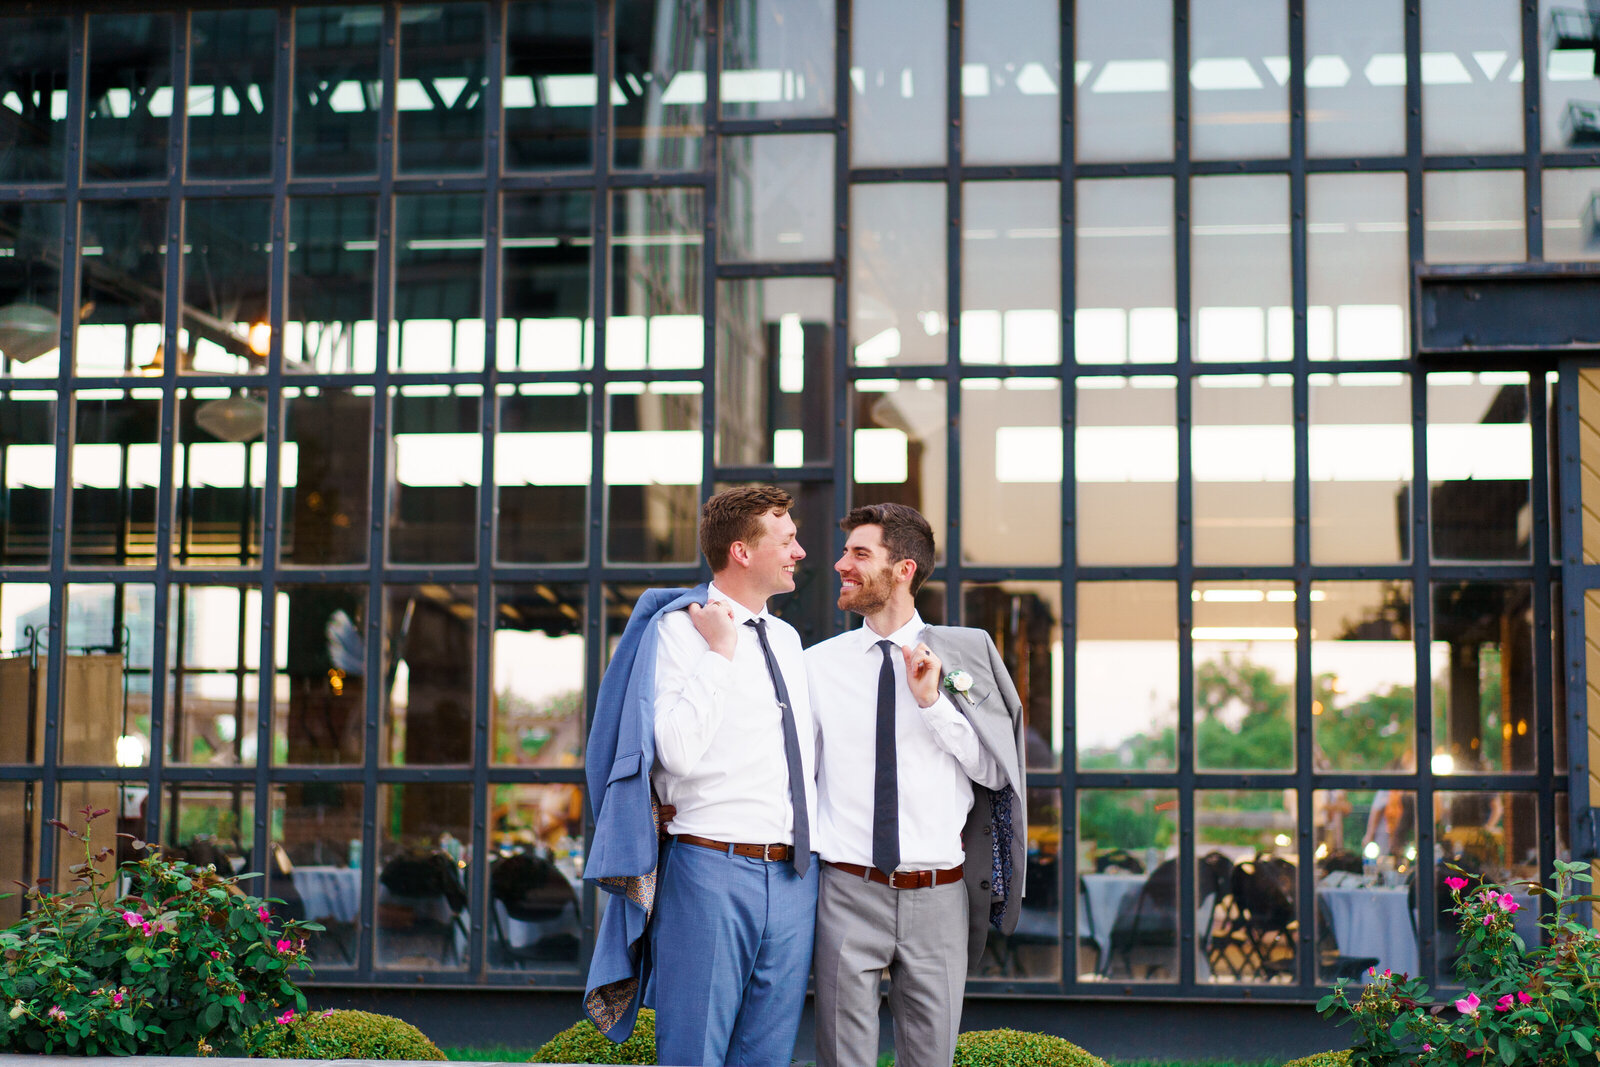 Two grooms smile lovingly at each other while their suit jackets are held over their shoulders. They're standing in front of a glass wall at North Bank Park Pavilion in Columbus, Ohio.